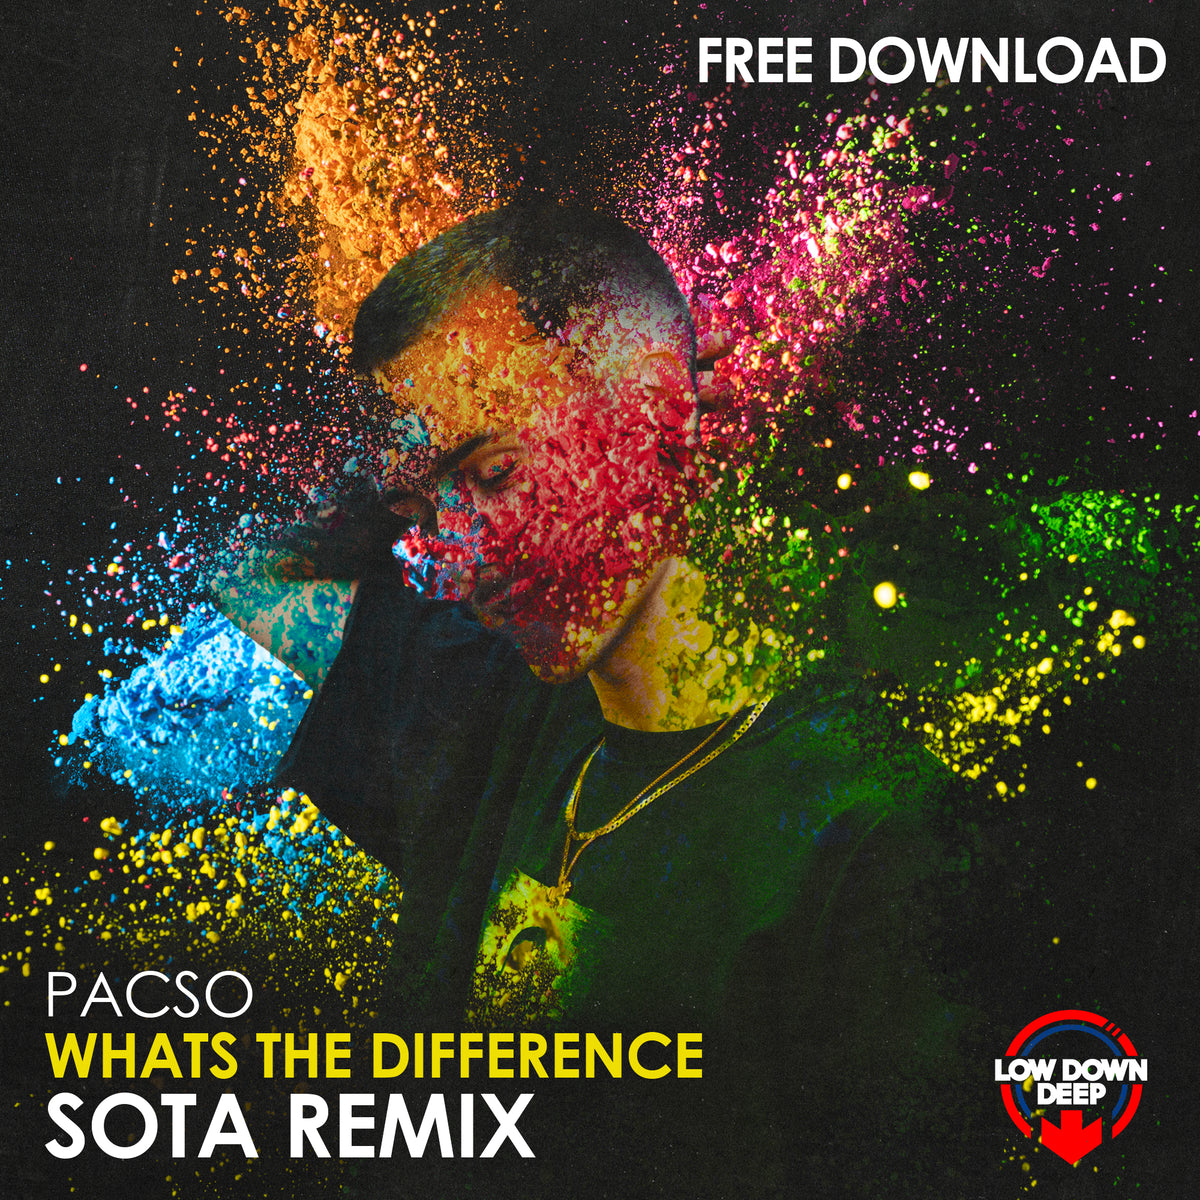 Pacso - Whats The Difference (Sota Remix) FREE DOWNLOAD